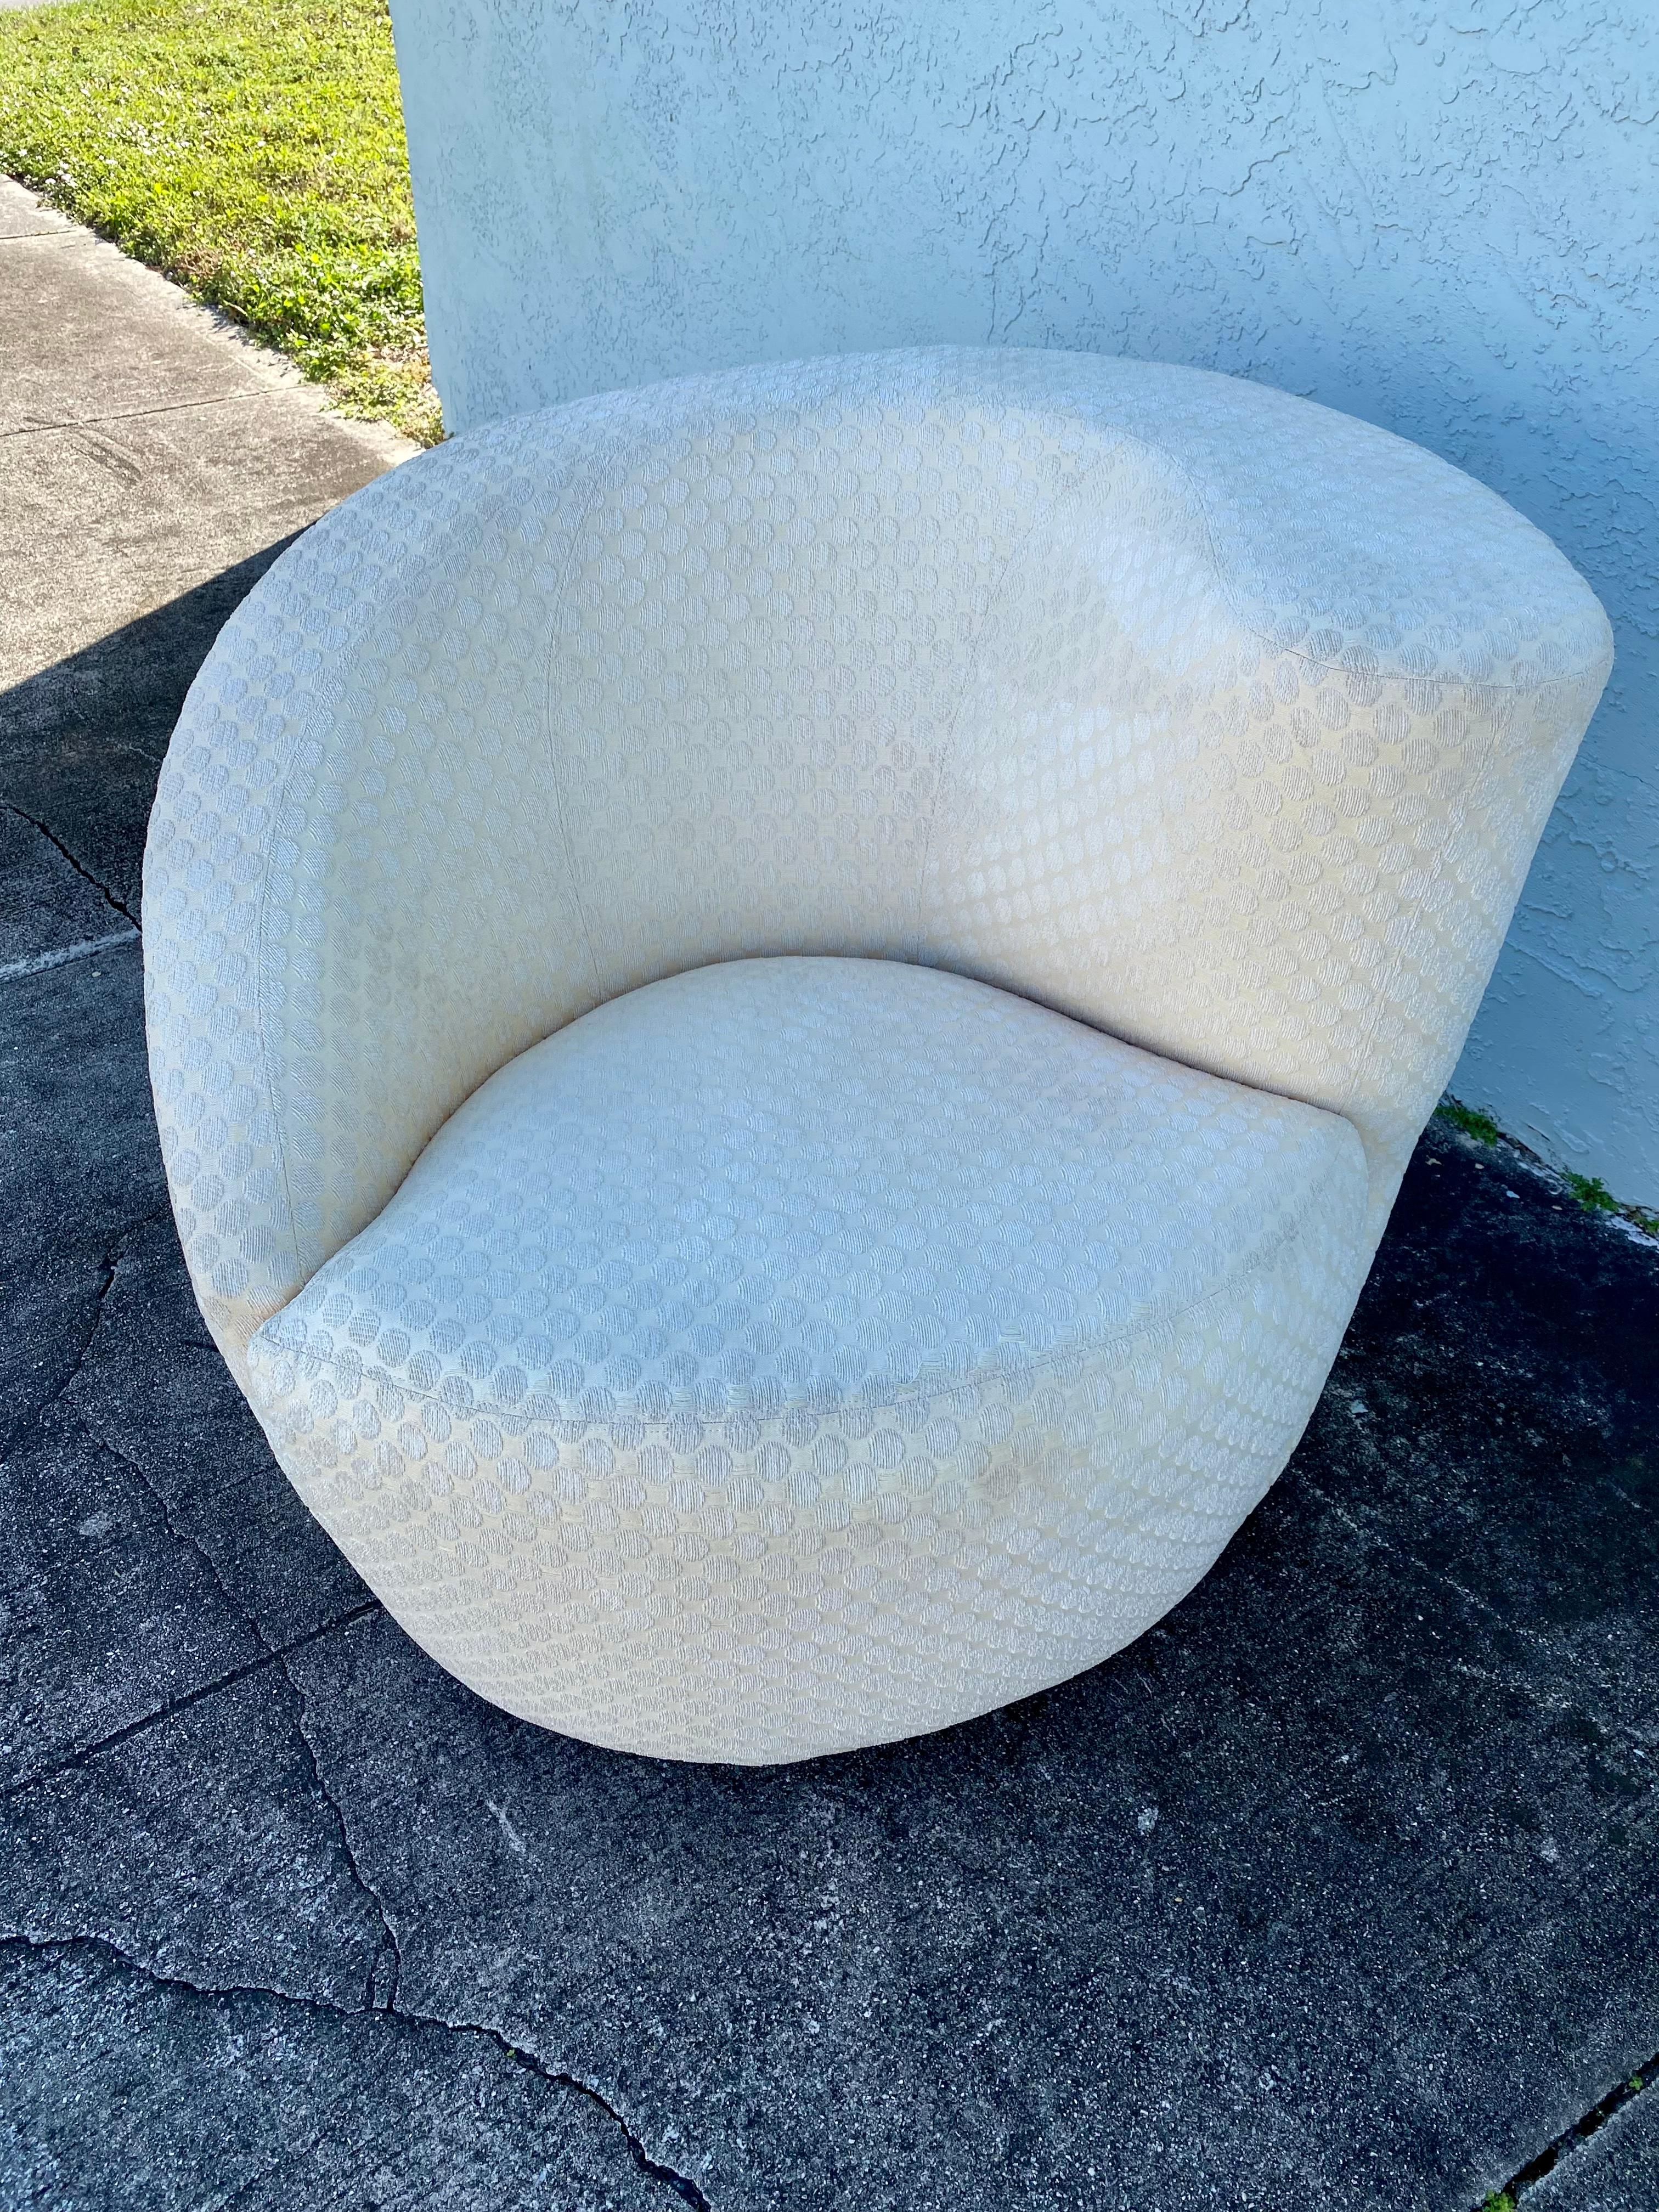 1980s Directional Cream Polka Dots Swivel Chairs, Set of 2 For Sale 4